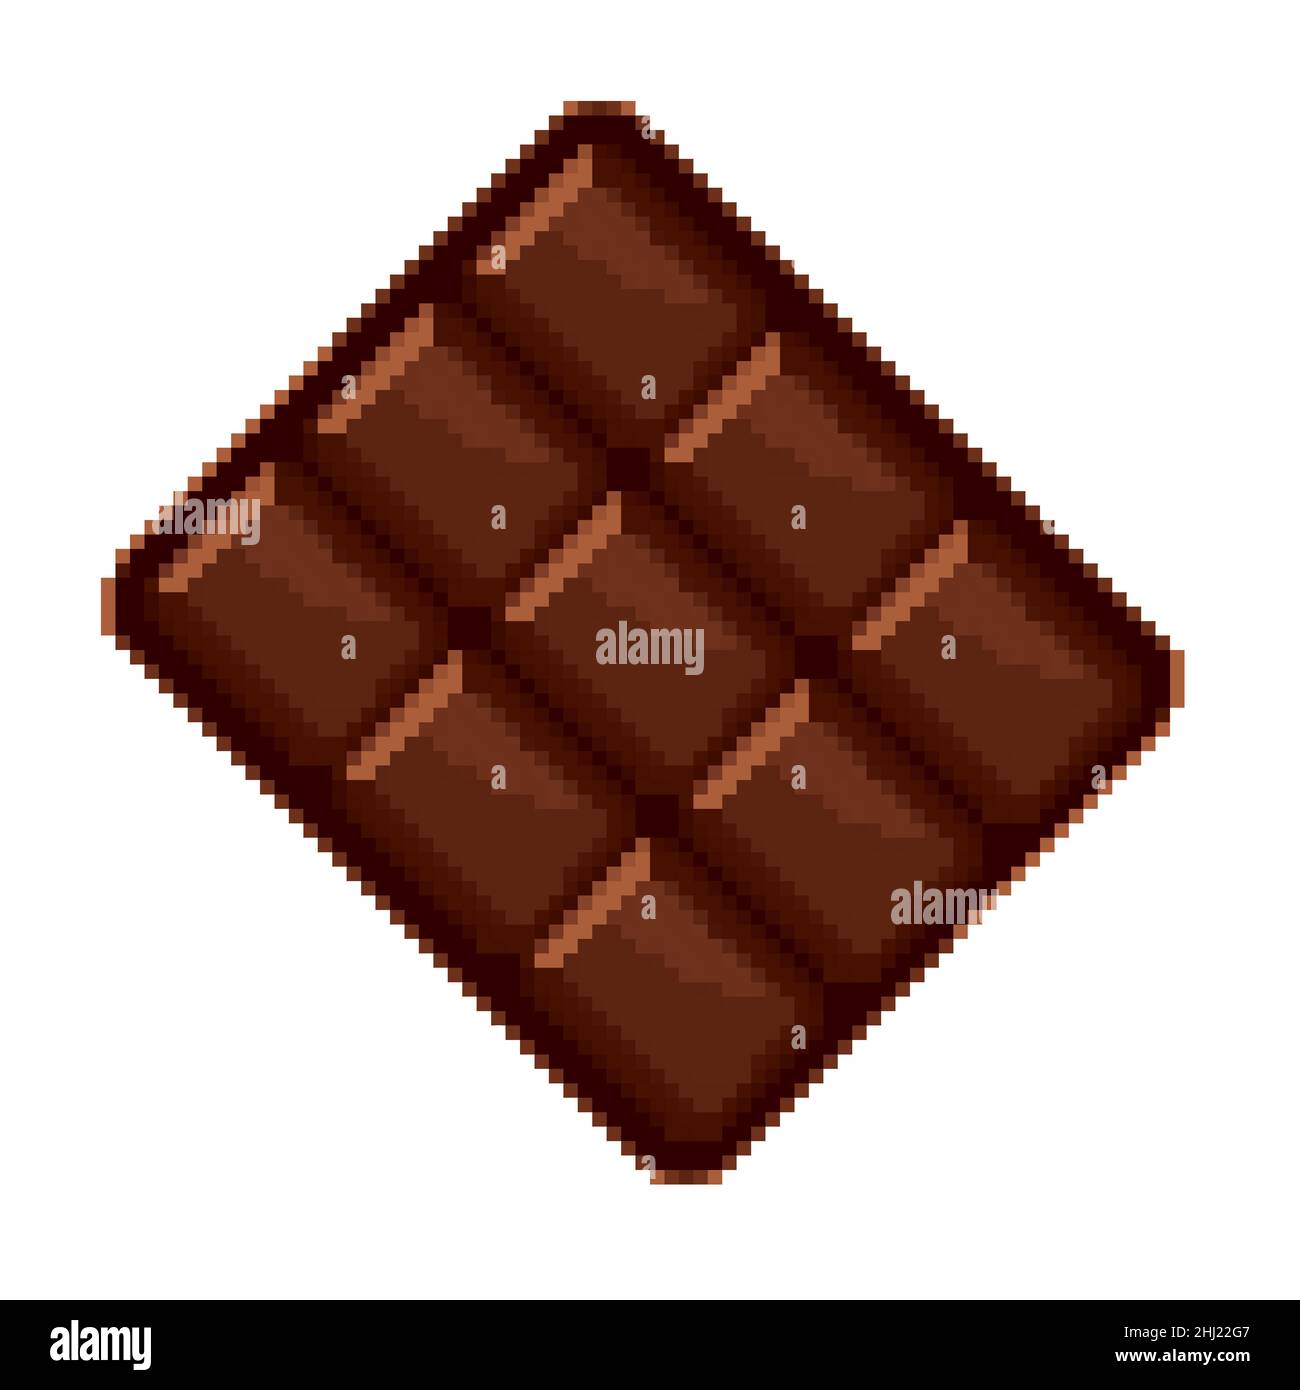 Pixel art: a tasty brown chocolate bar, can be divided in nine pieces. Stock Photo